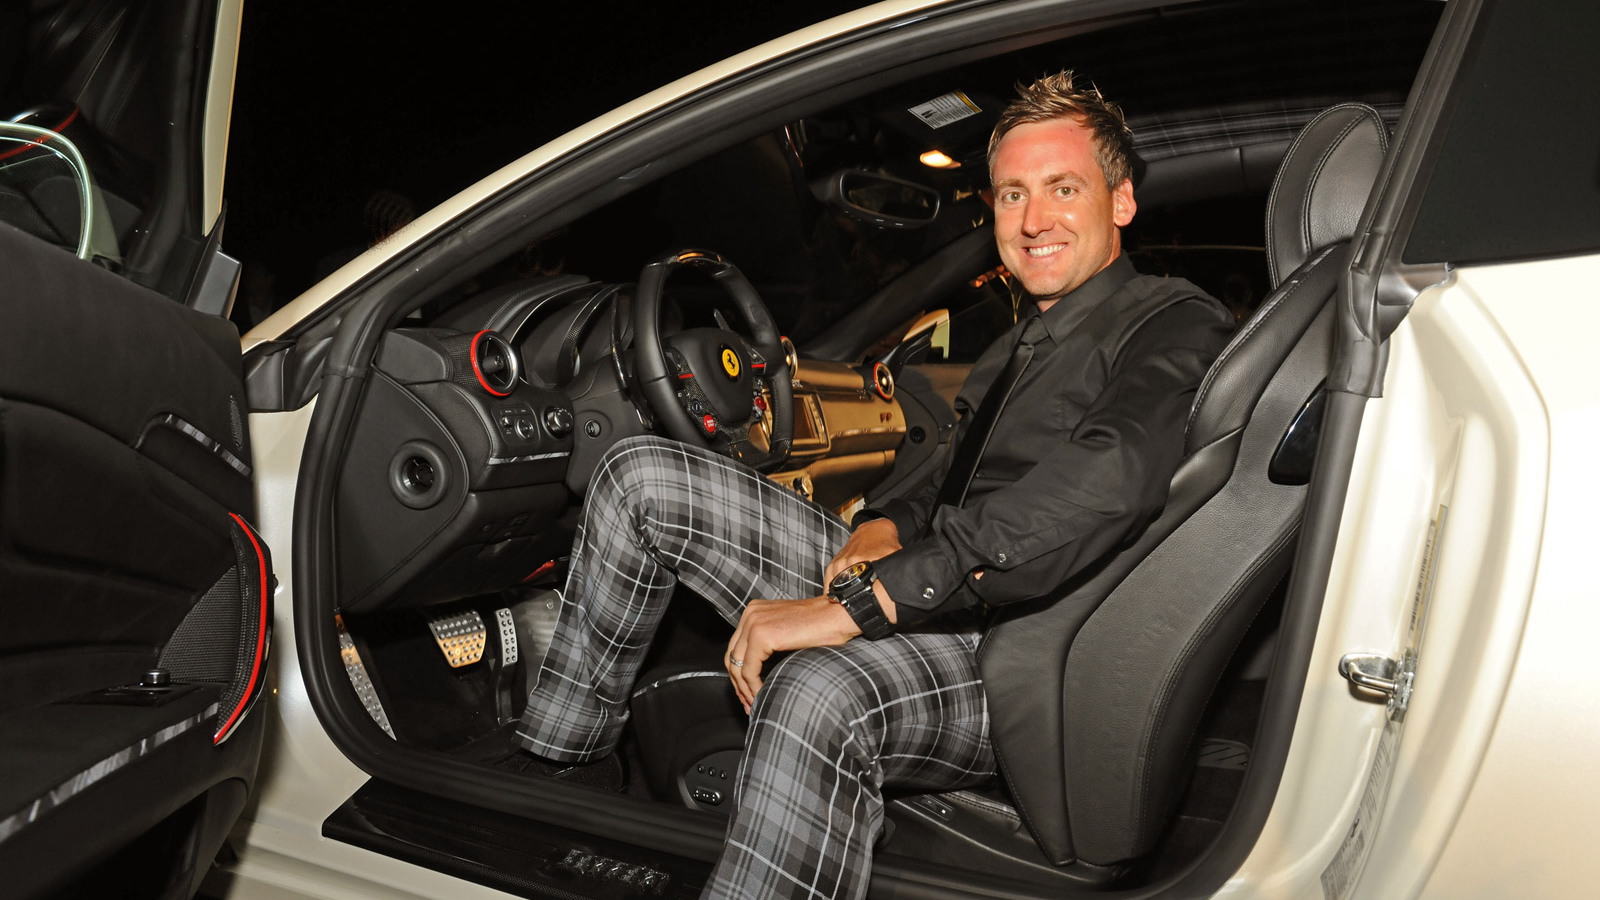 Ferrari FF personalized by Ferrari Tailor Made for golfer Ian Poulter